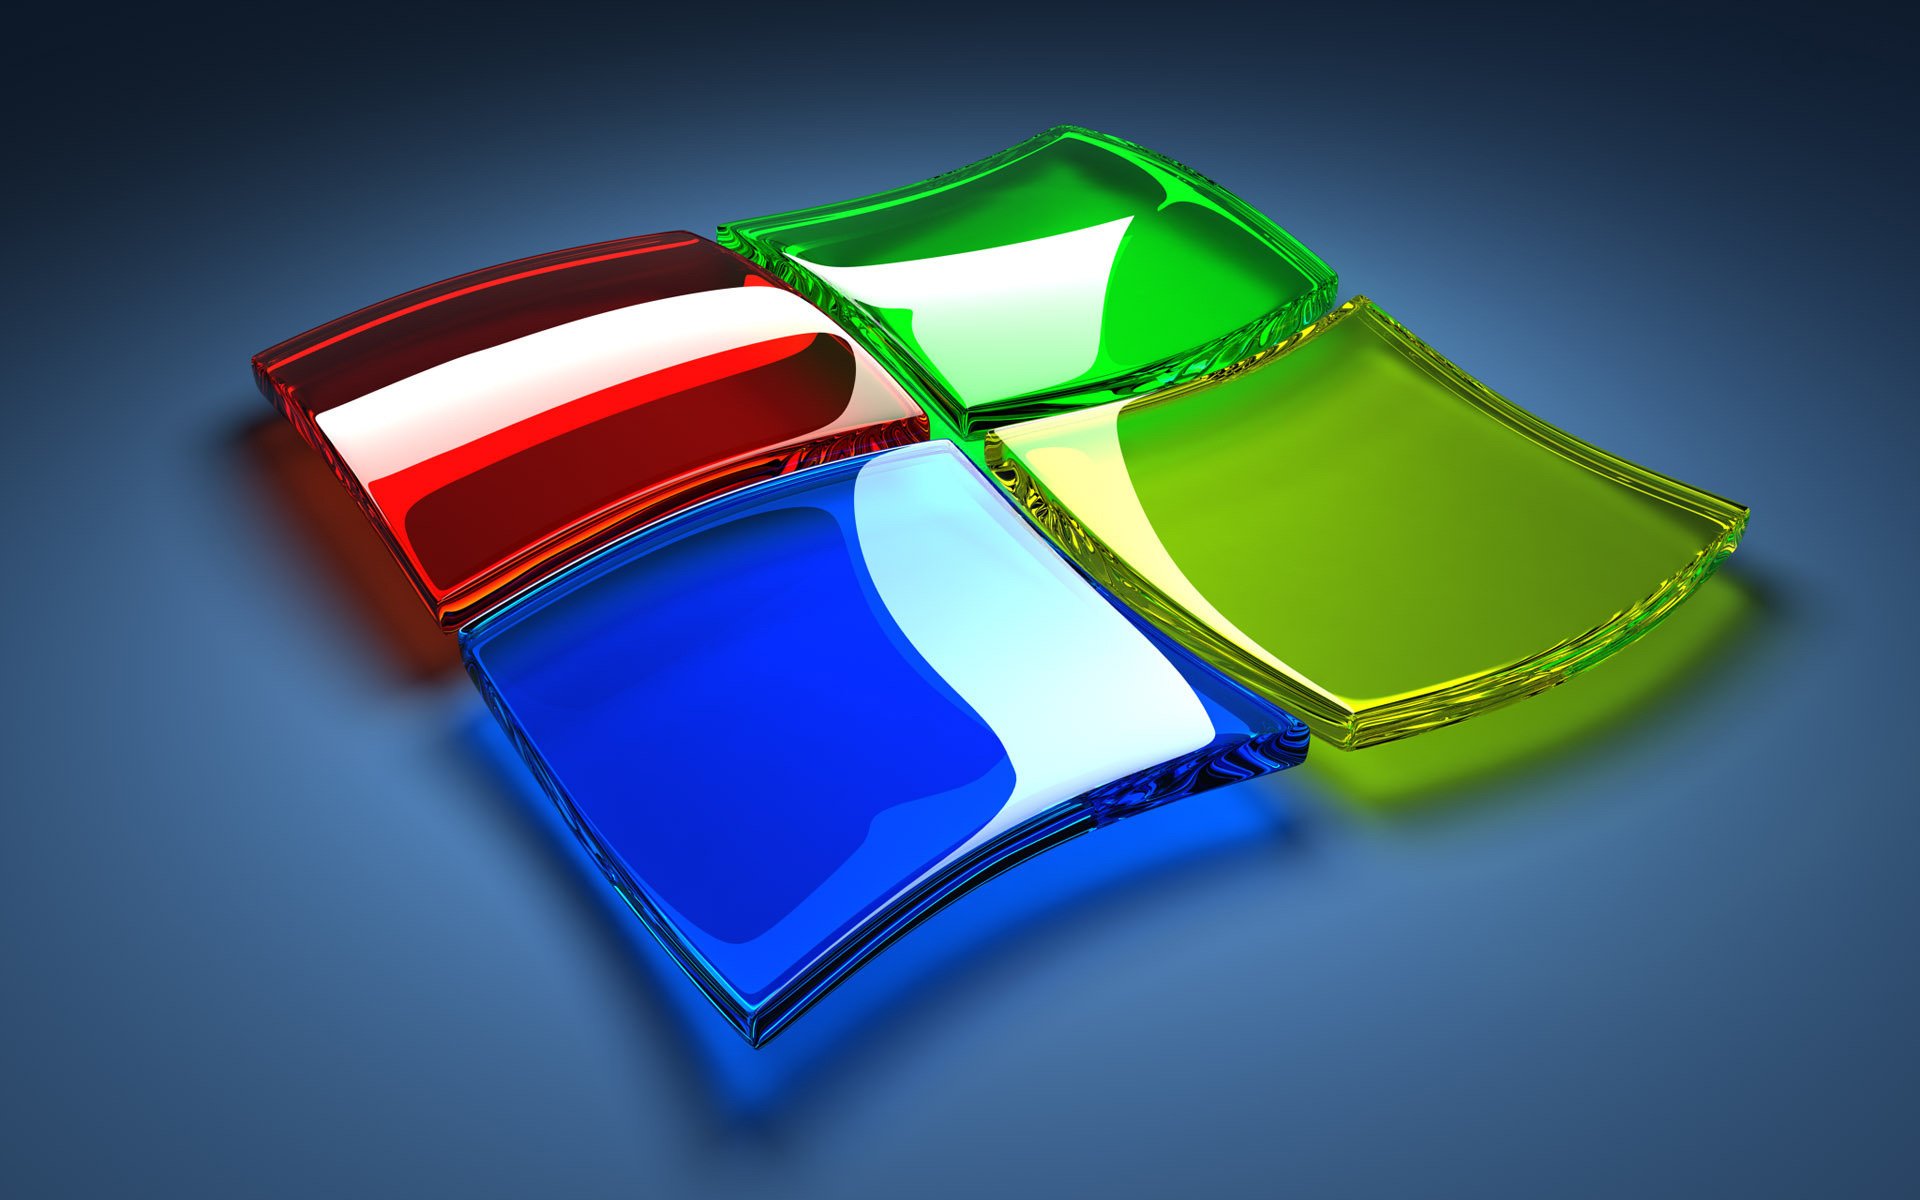 Windows 8 Backgrounds   High resolution wallpapers for your PC